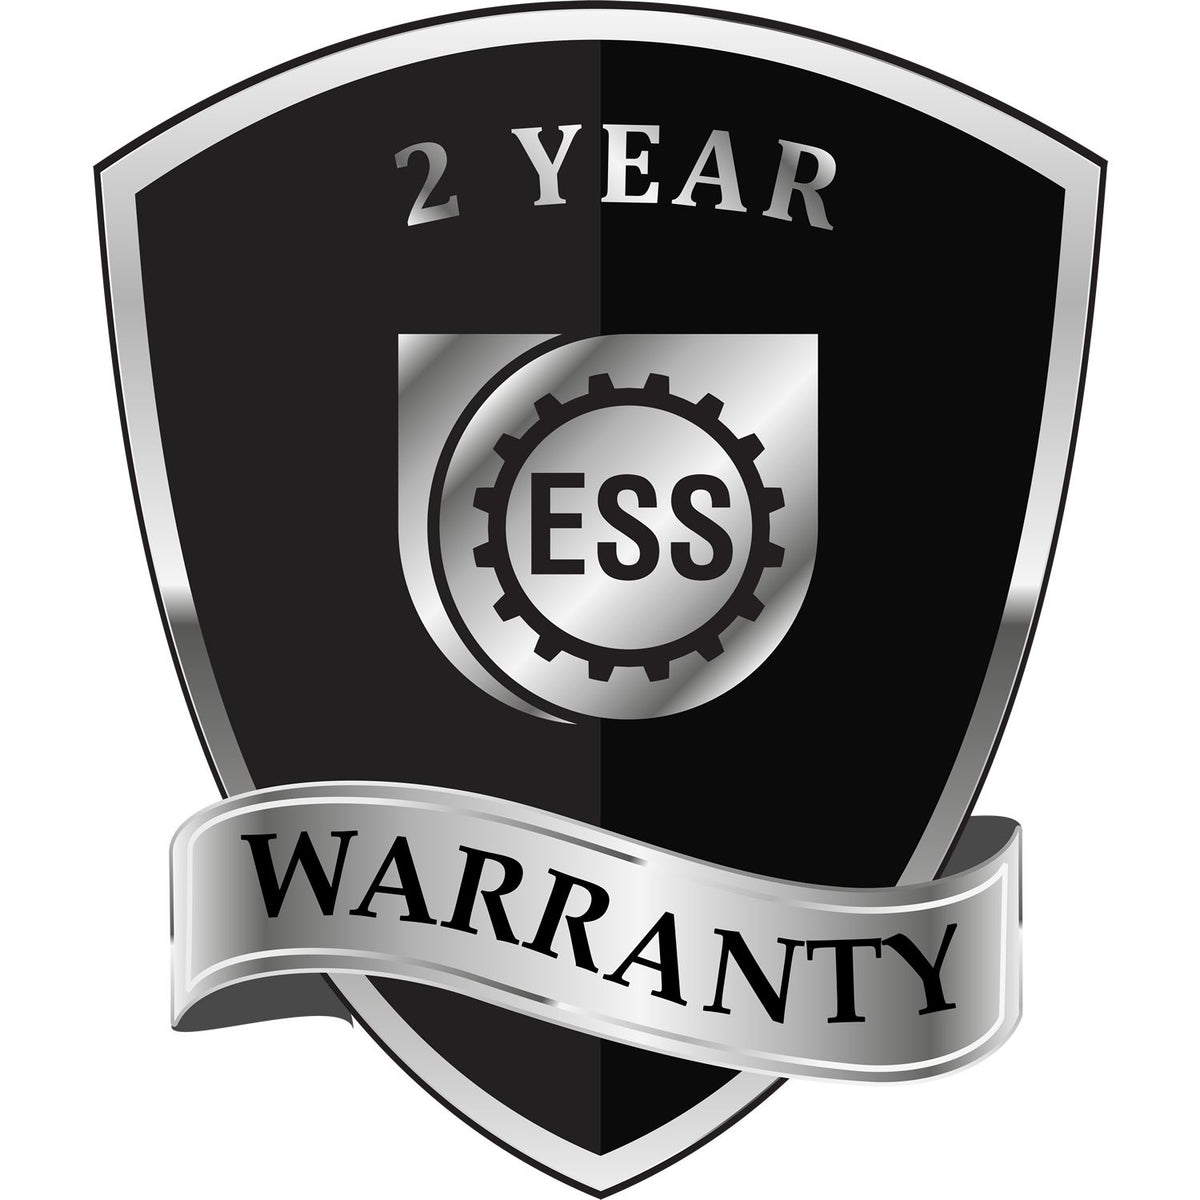 A badge or emblem showing a warranty icon for the Extended Long Reach Iowa Architect Seal Embosser